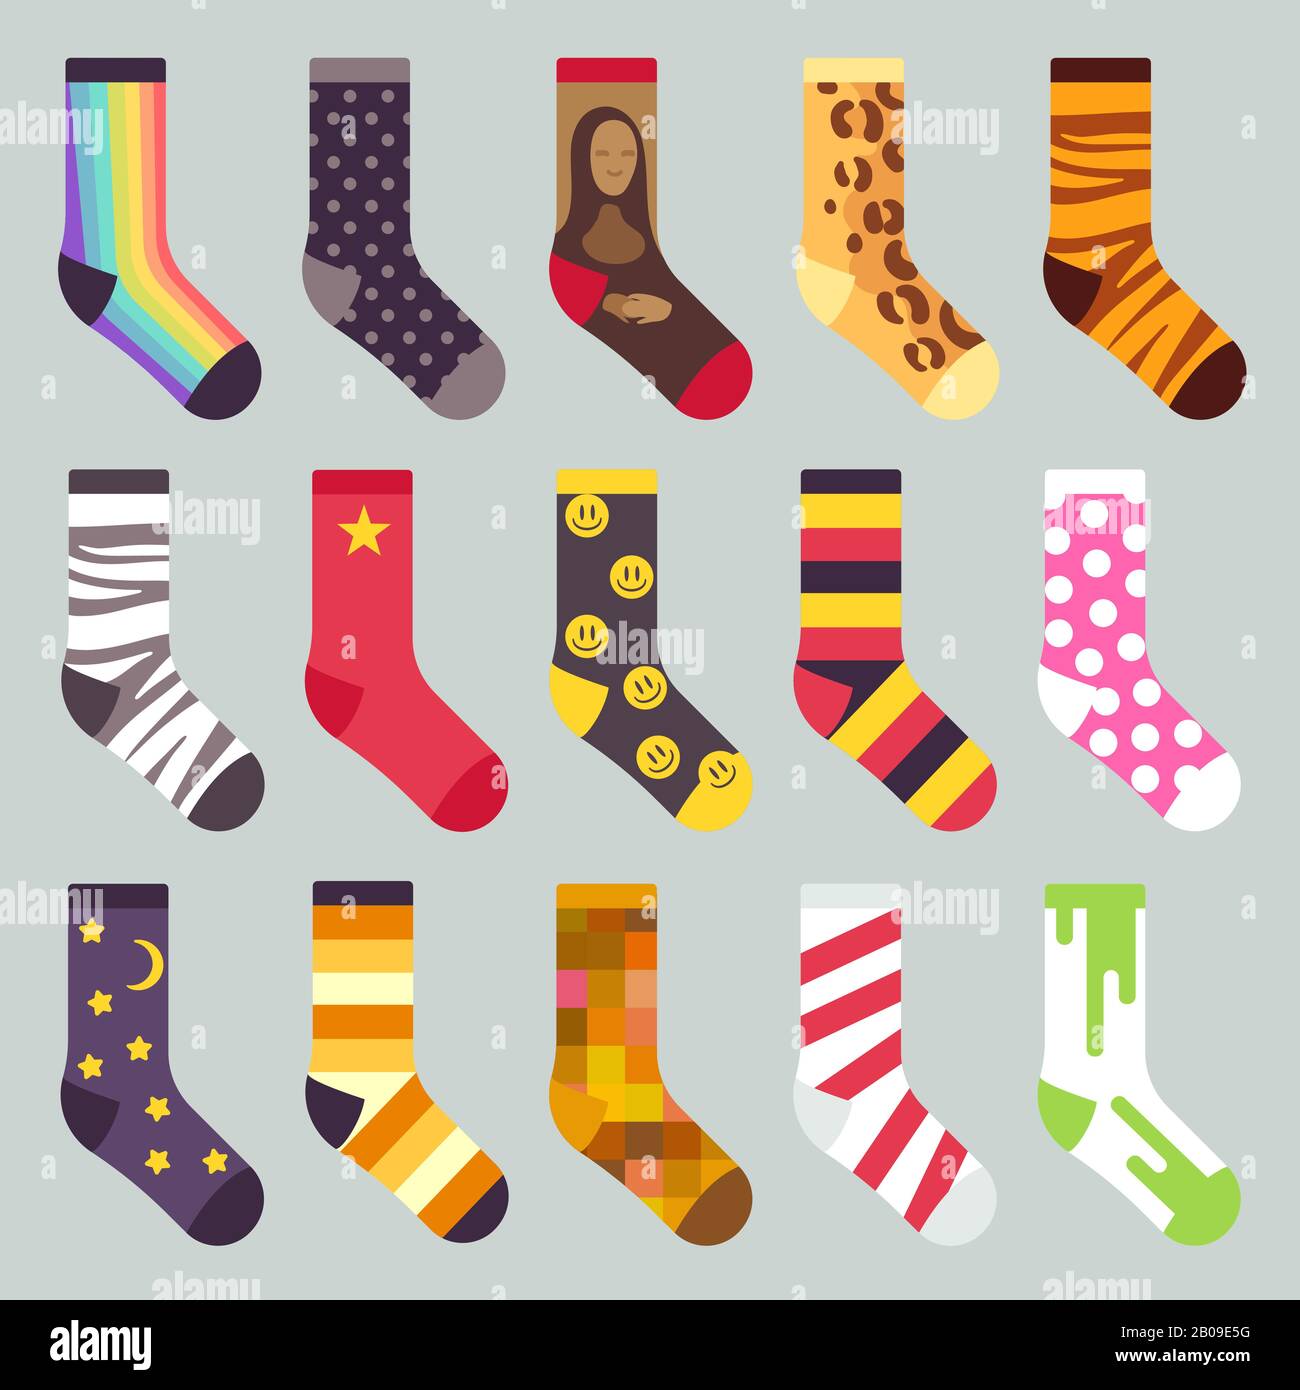 Textile colorful child warm socks vector. Set of sock with colored pattern, illustration of wool socks Stock Vector